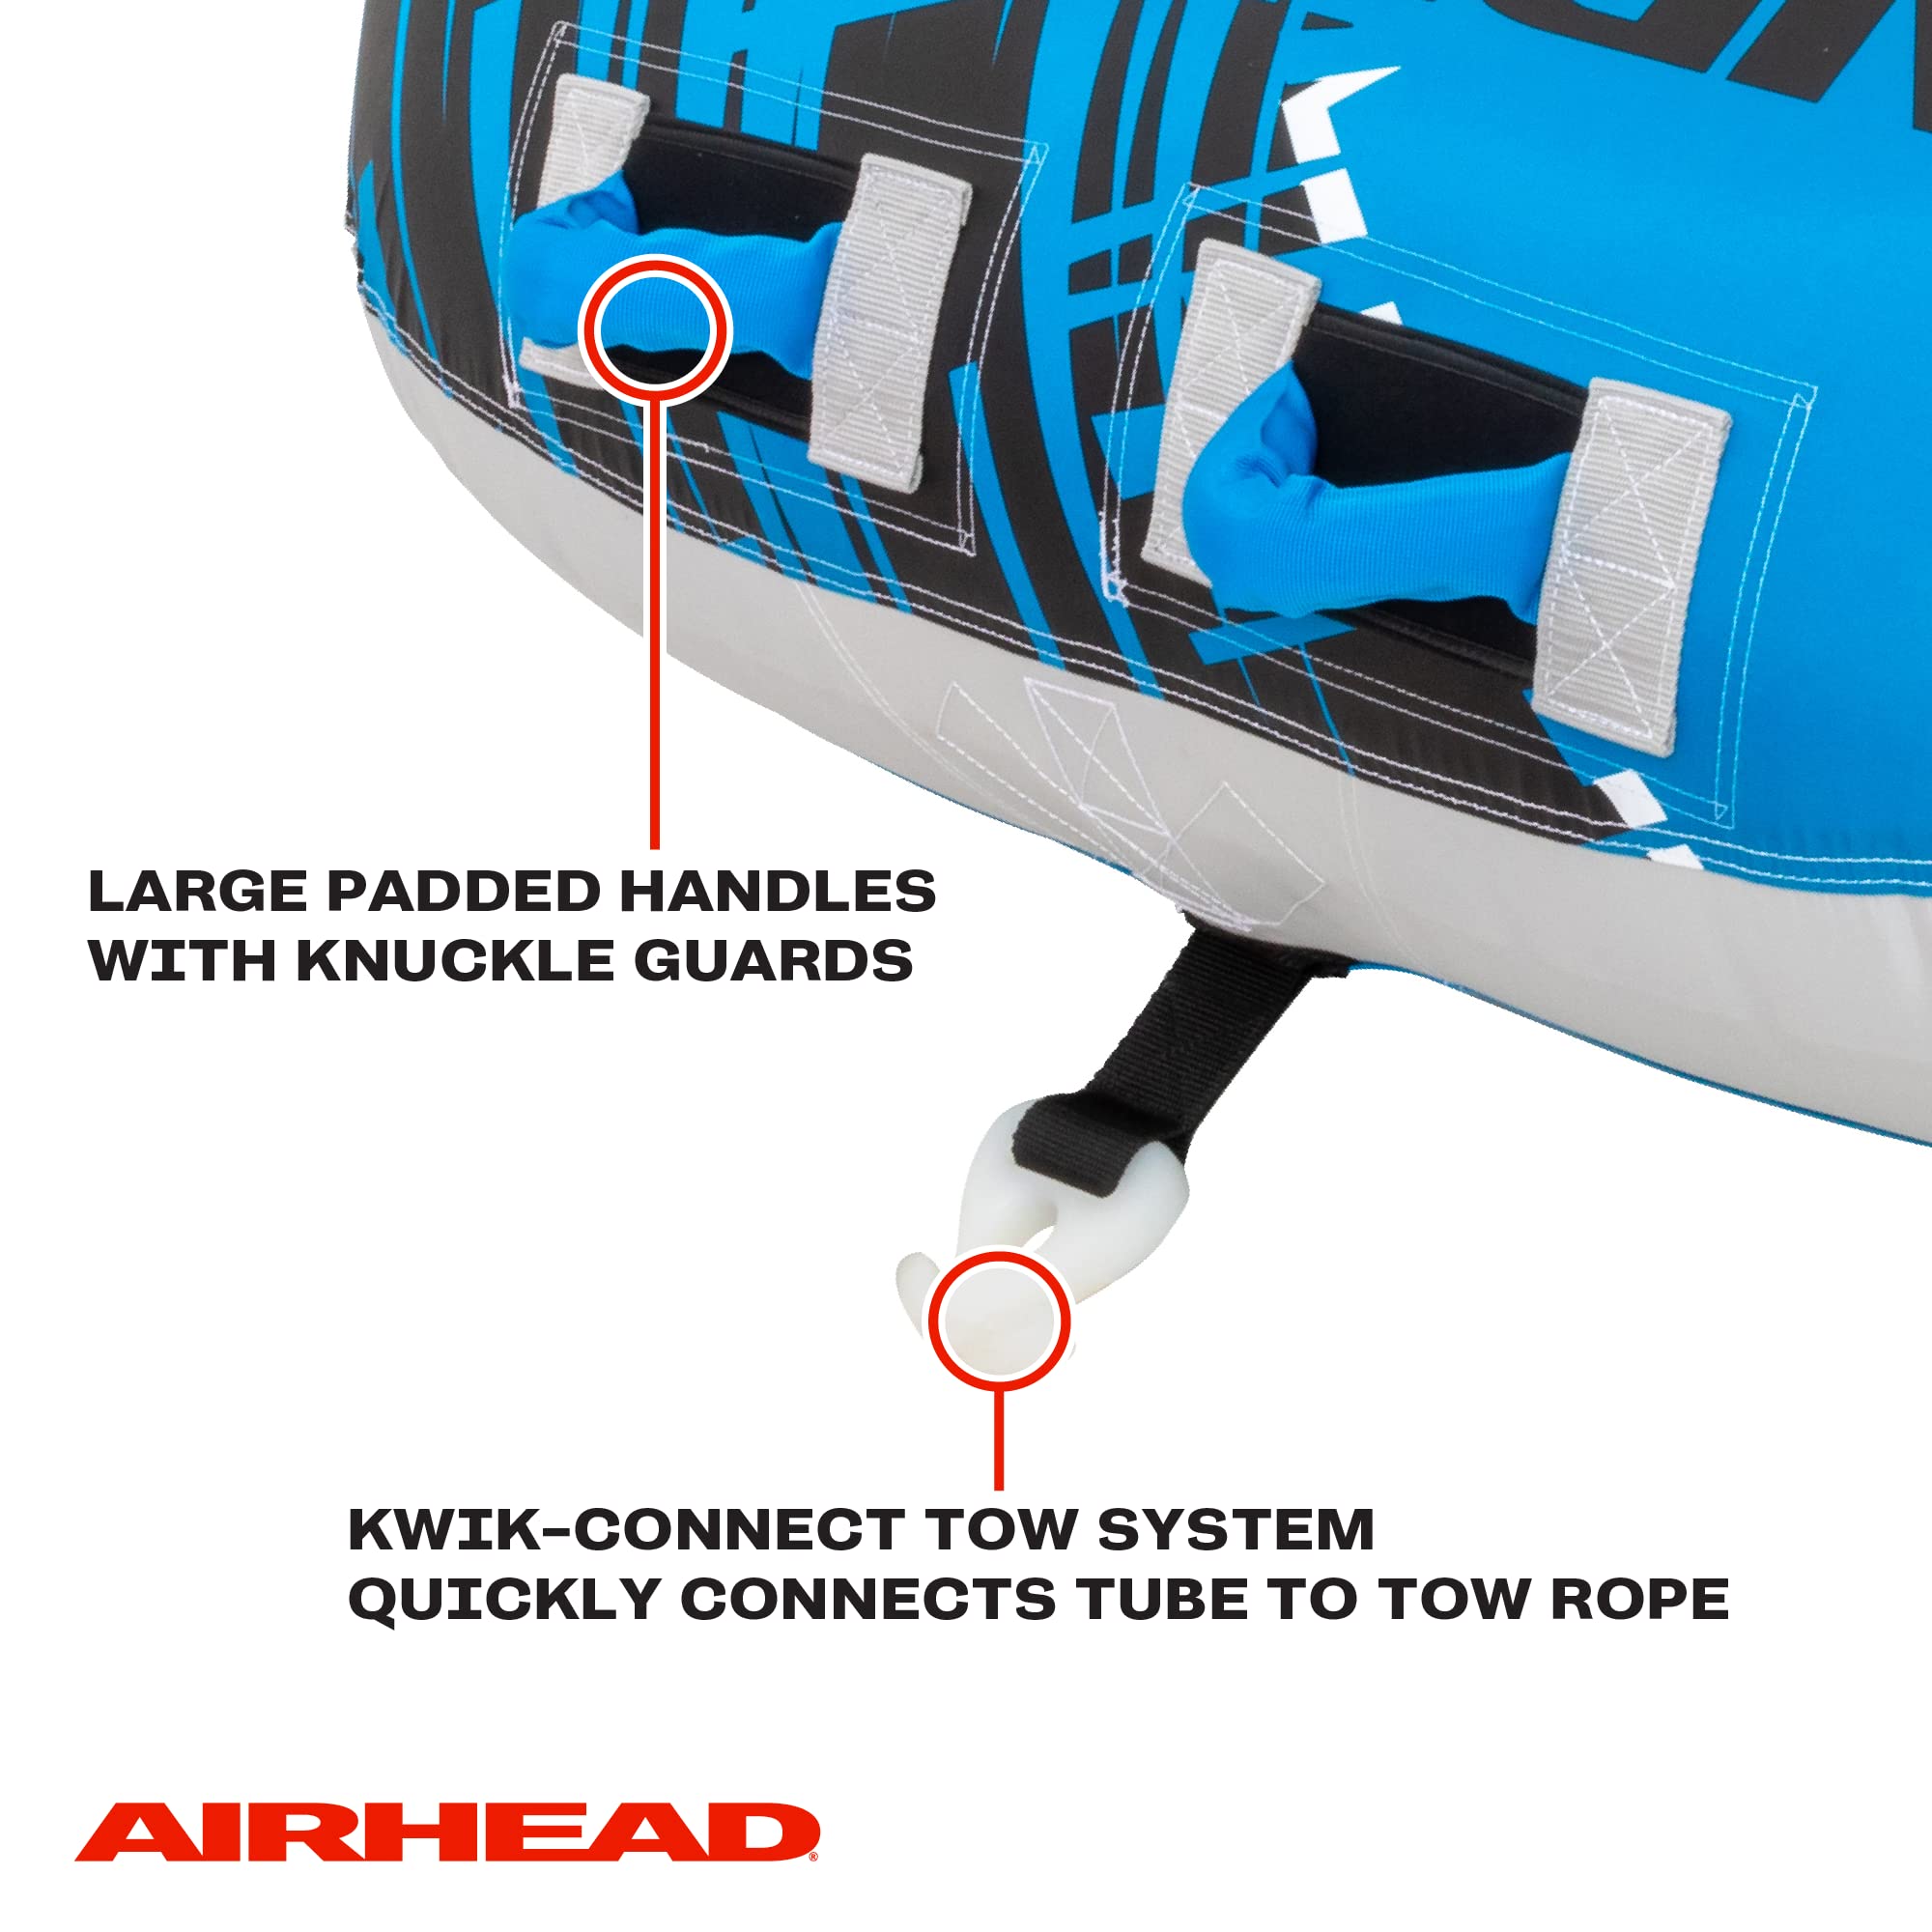 AIRHEAD G-Force Towable Tube for Boating, Multiple Size Options Available